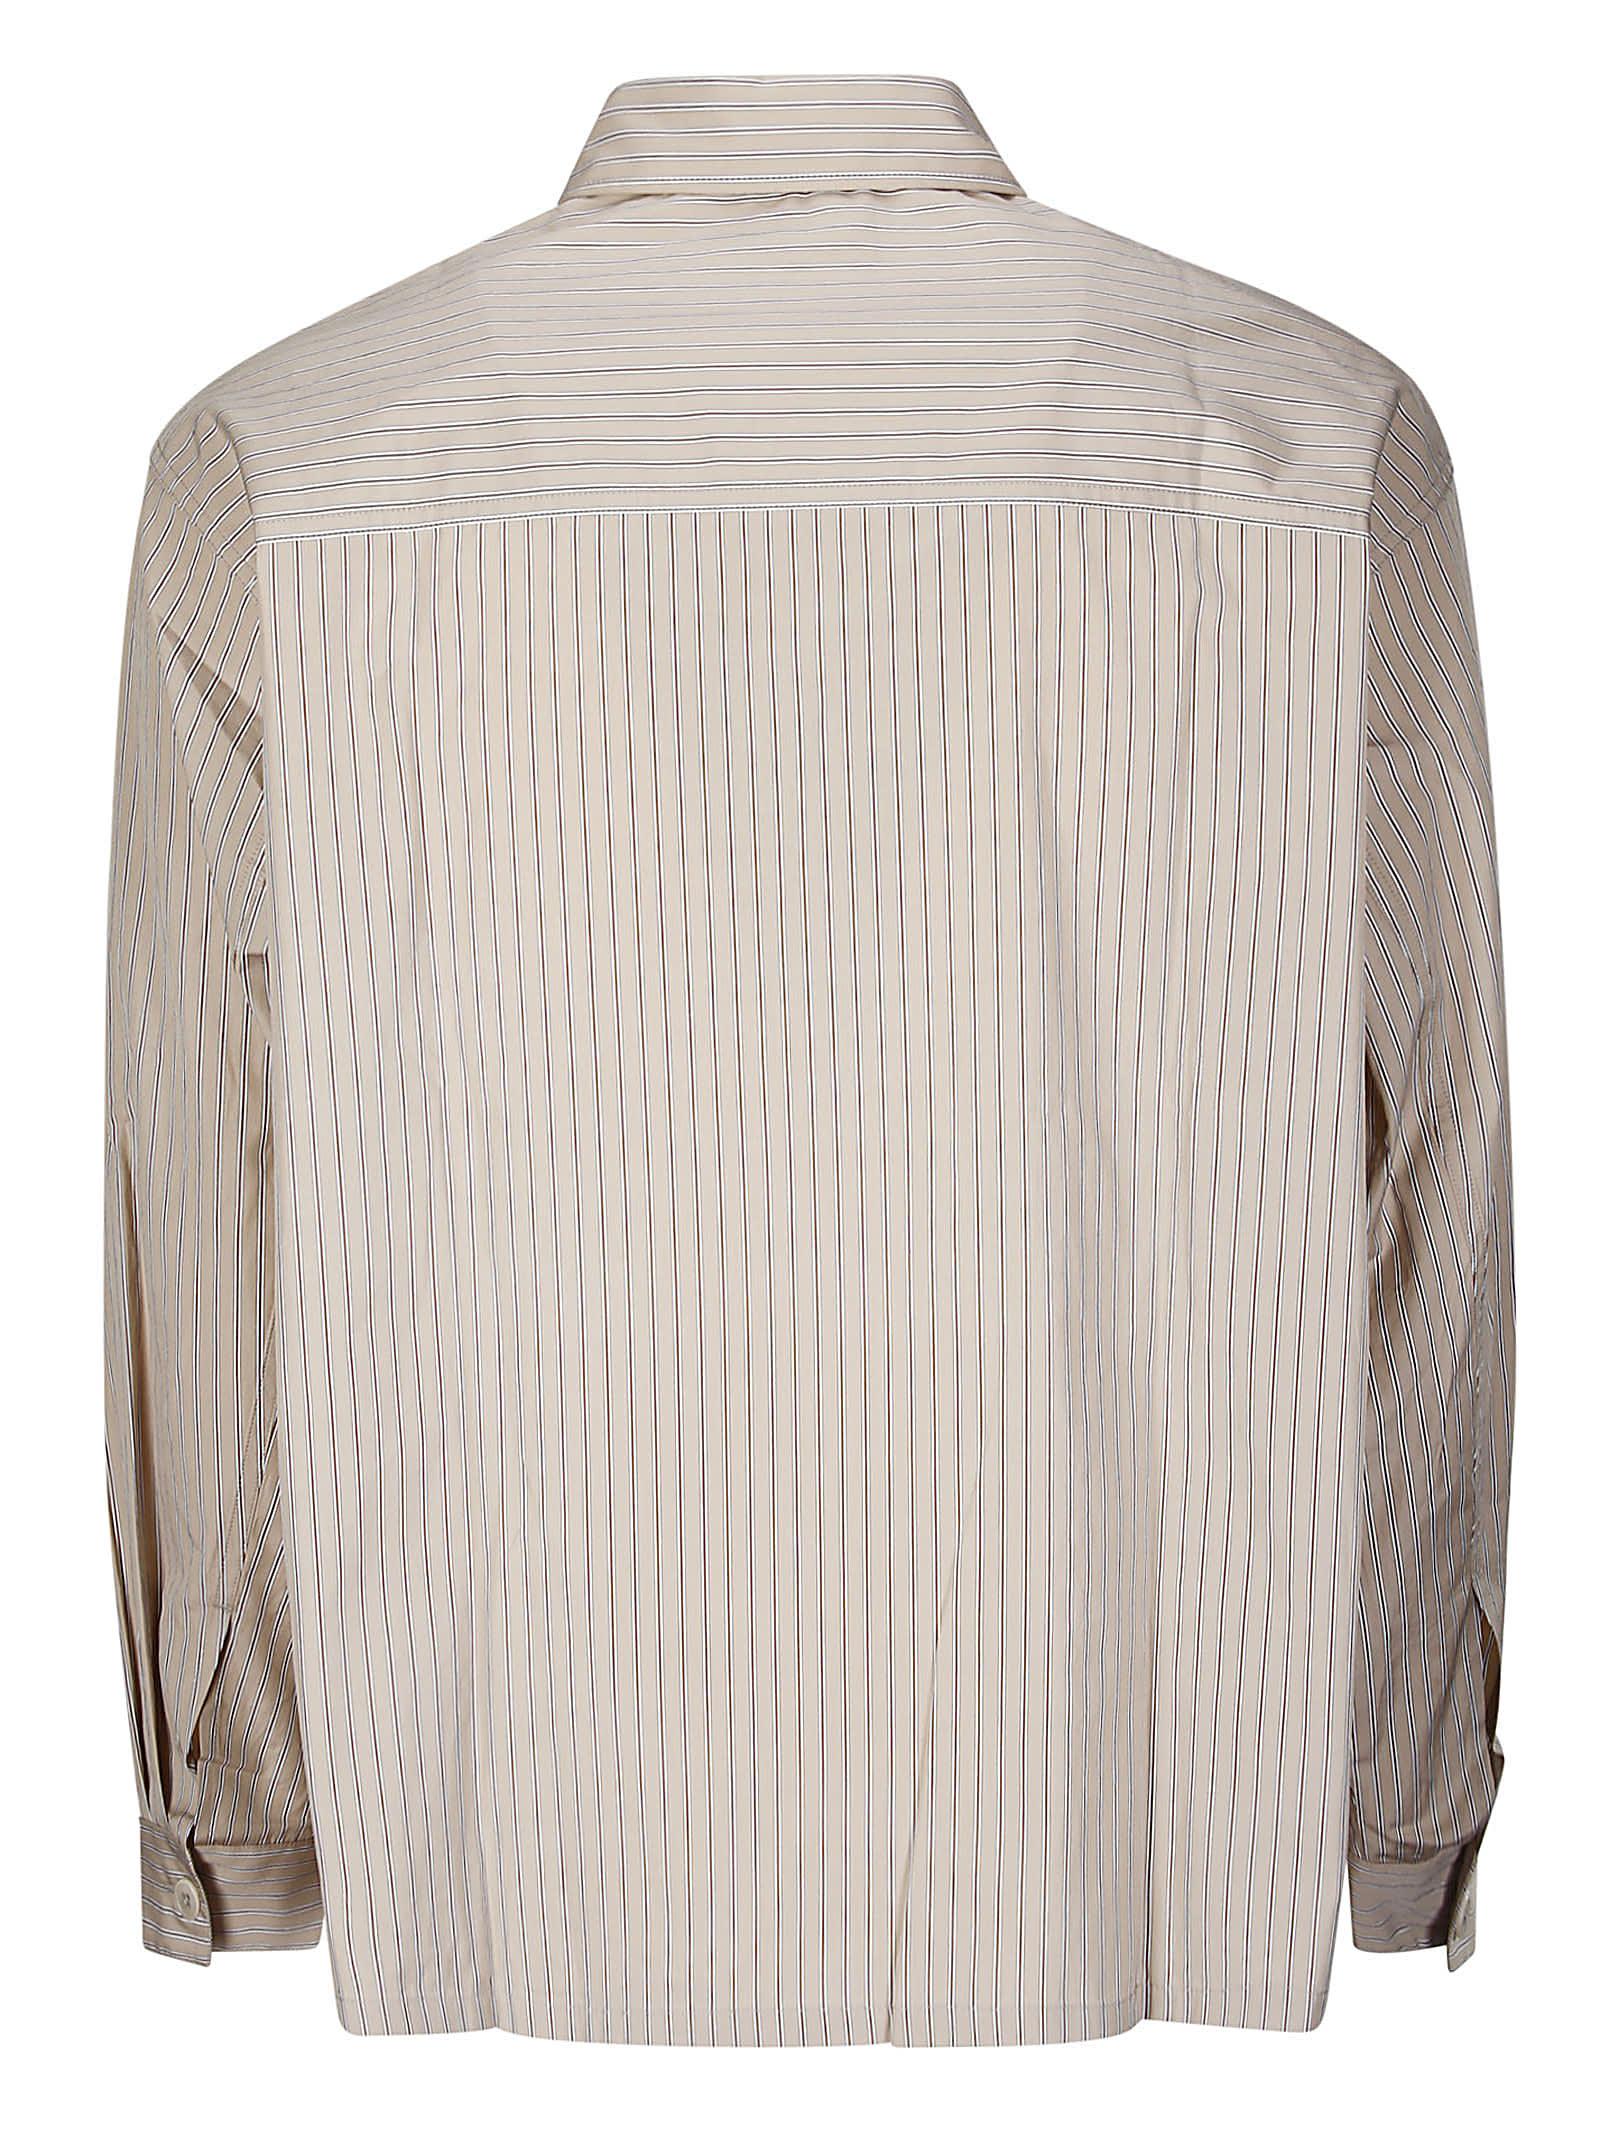 Lemaire Pyjama Shirt in Natural for Men | Lyst